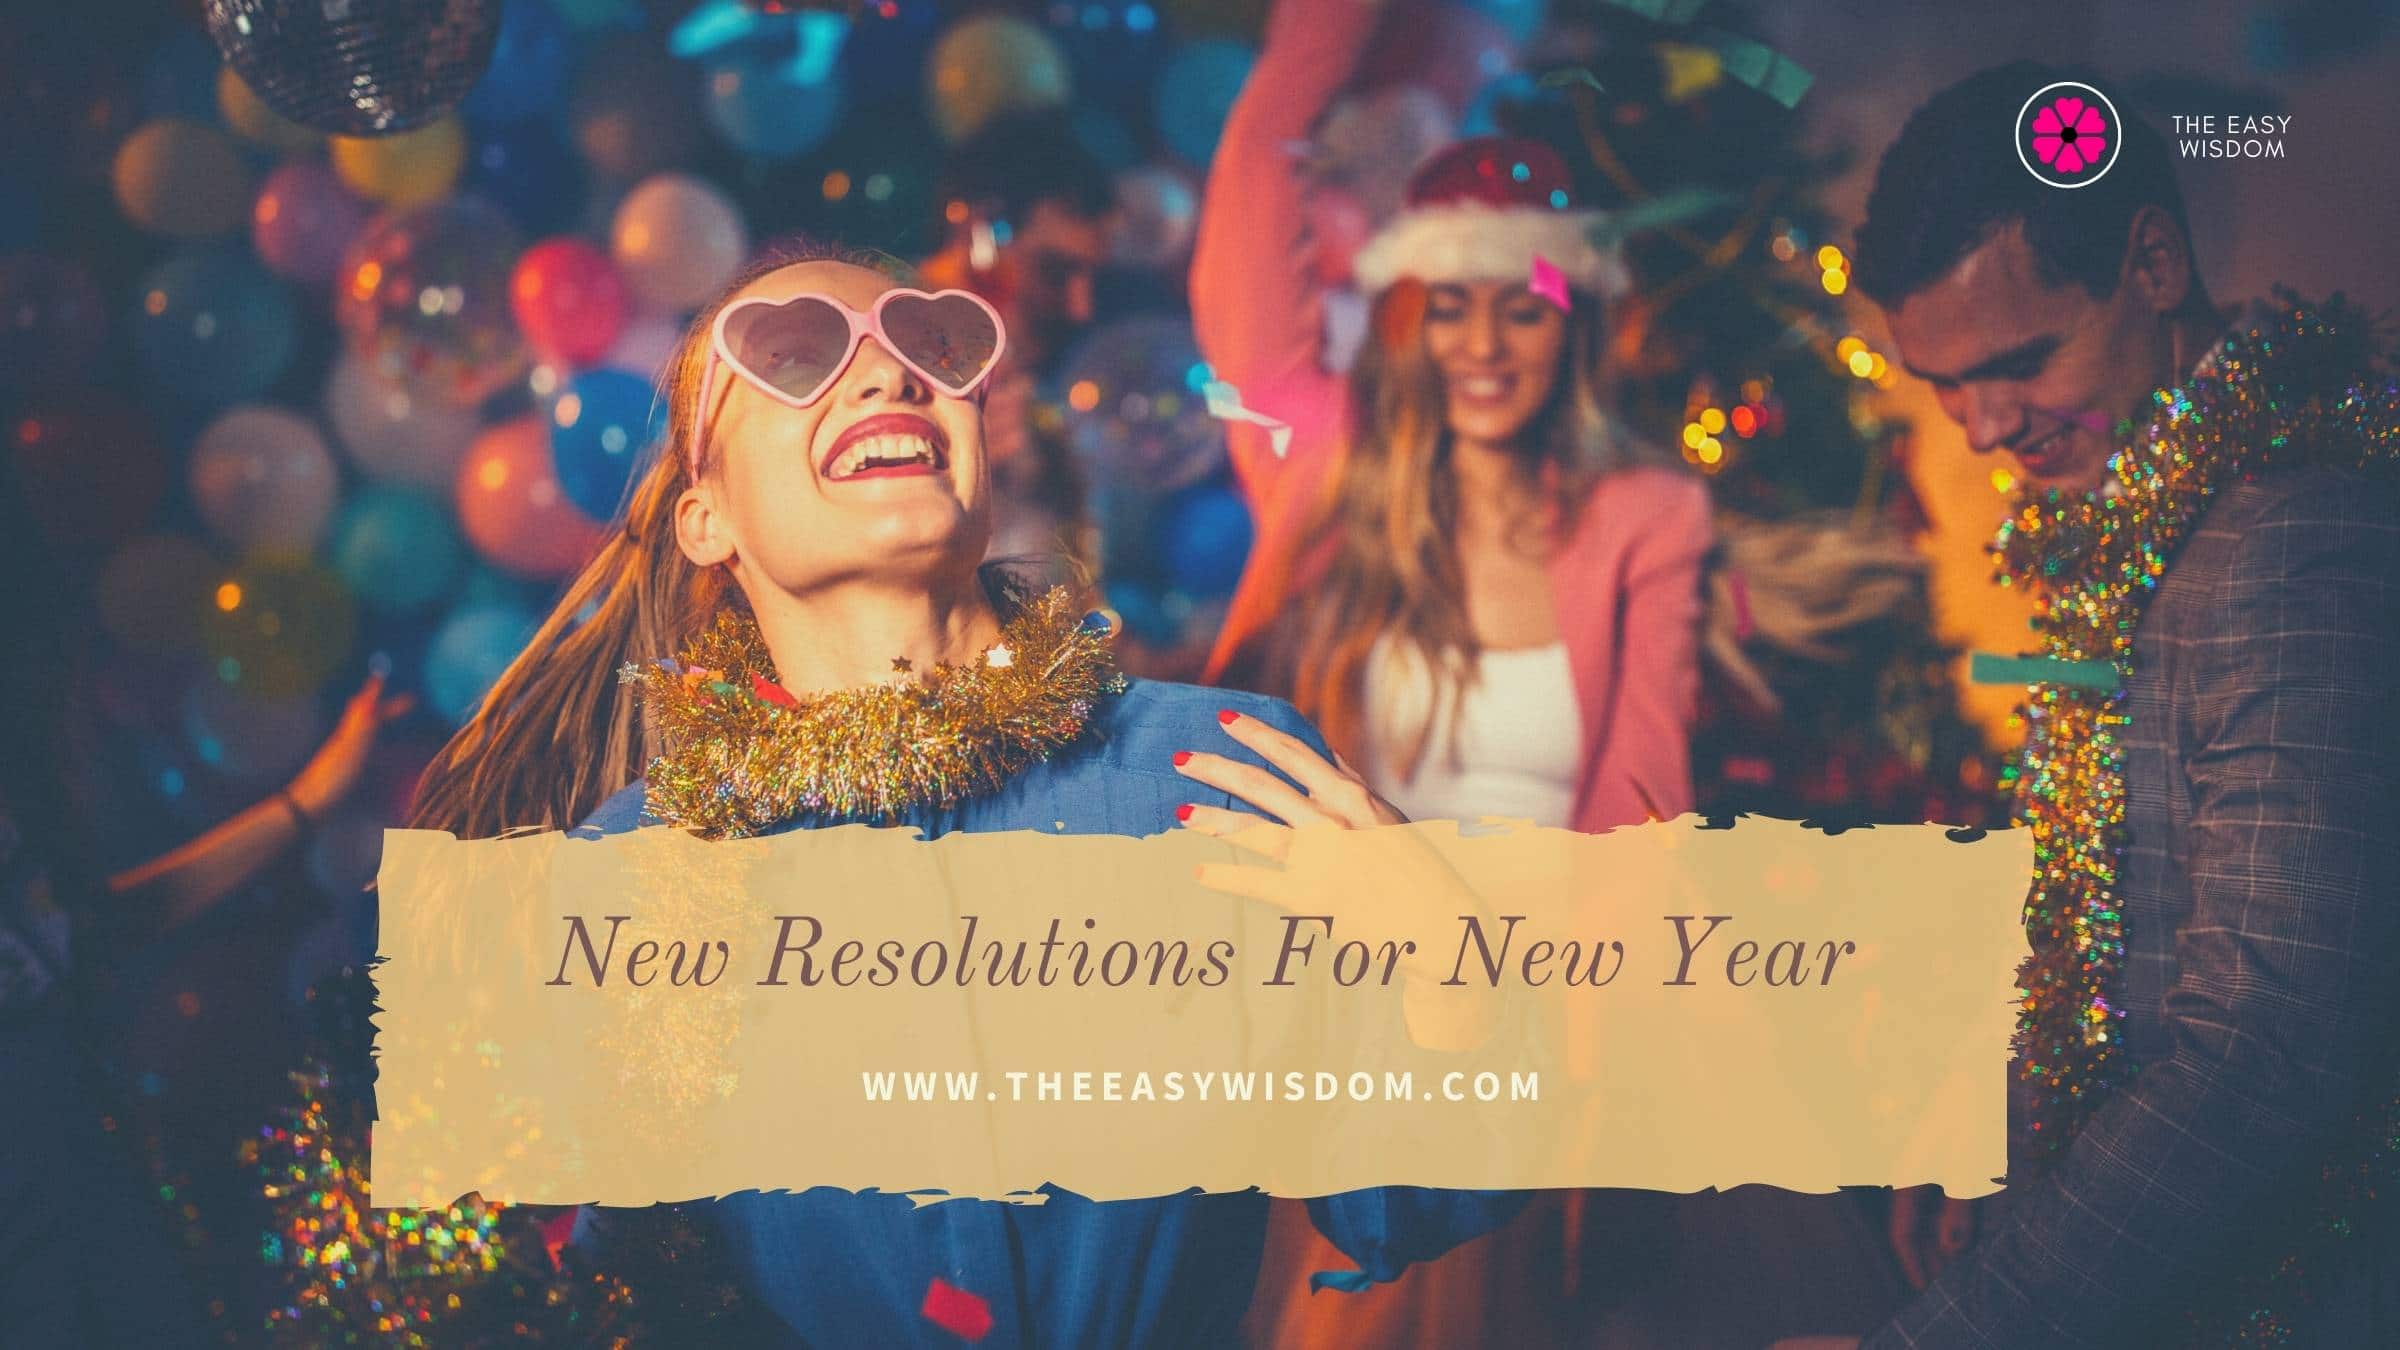 4 Things To Introspect Before Making New Resolutions for New Year! www.theeasywisdom.com